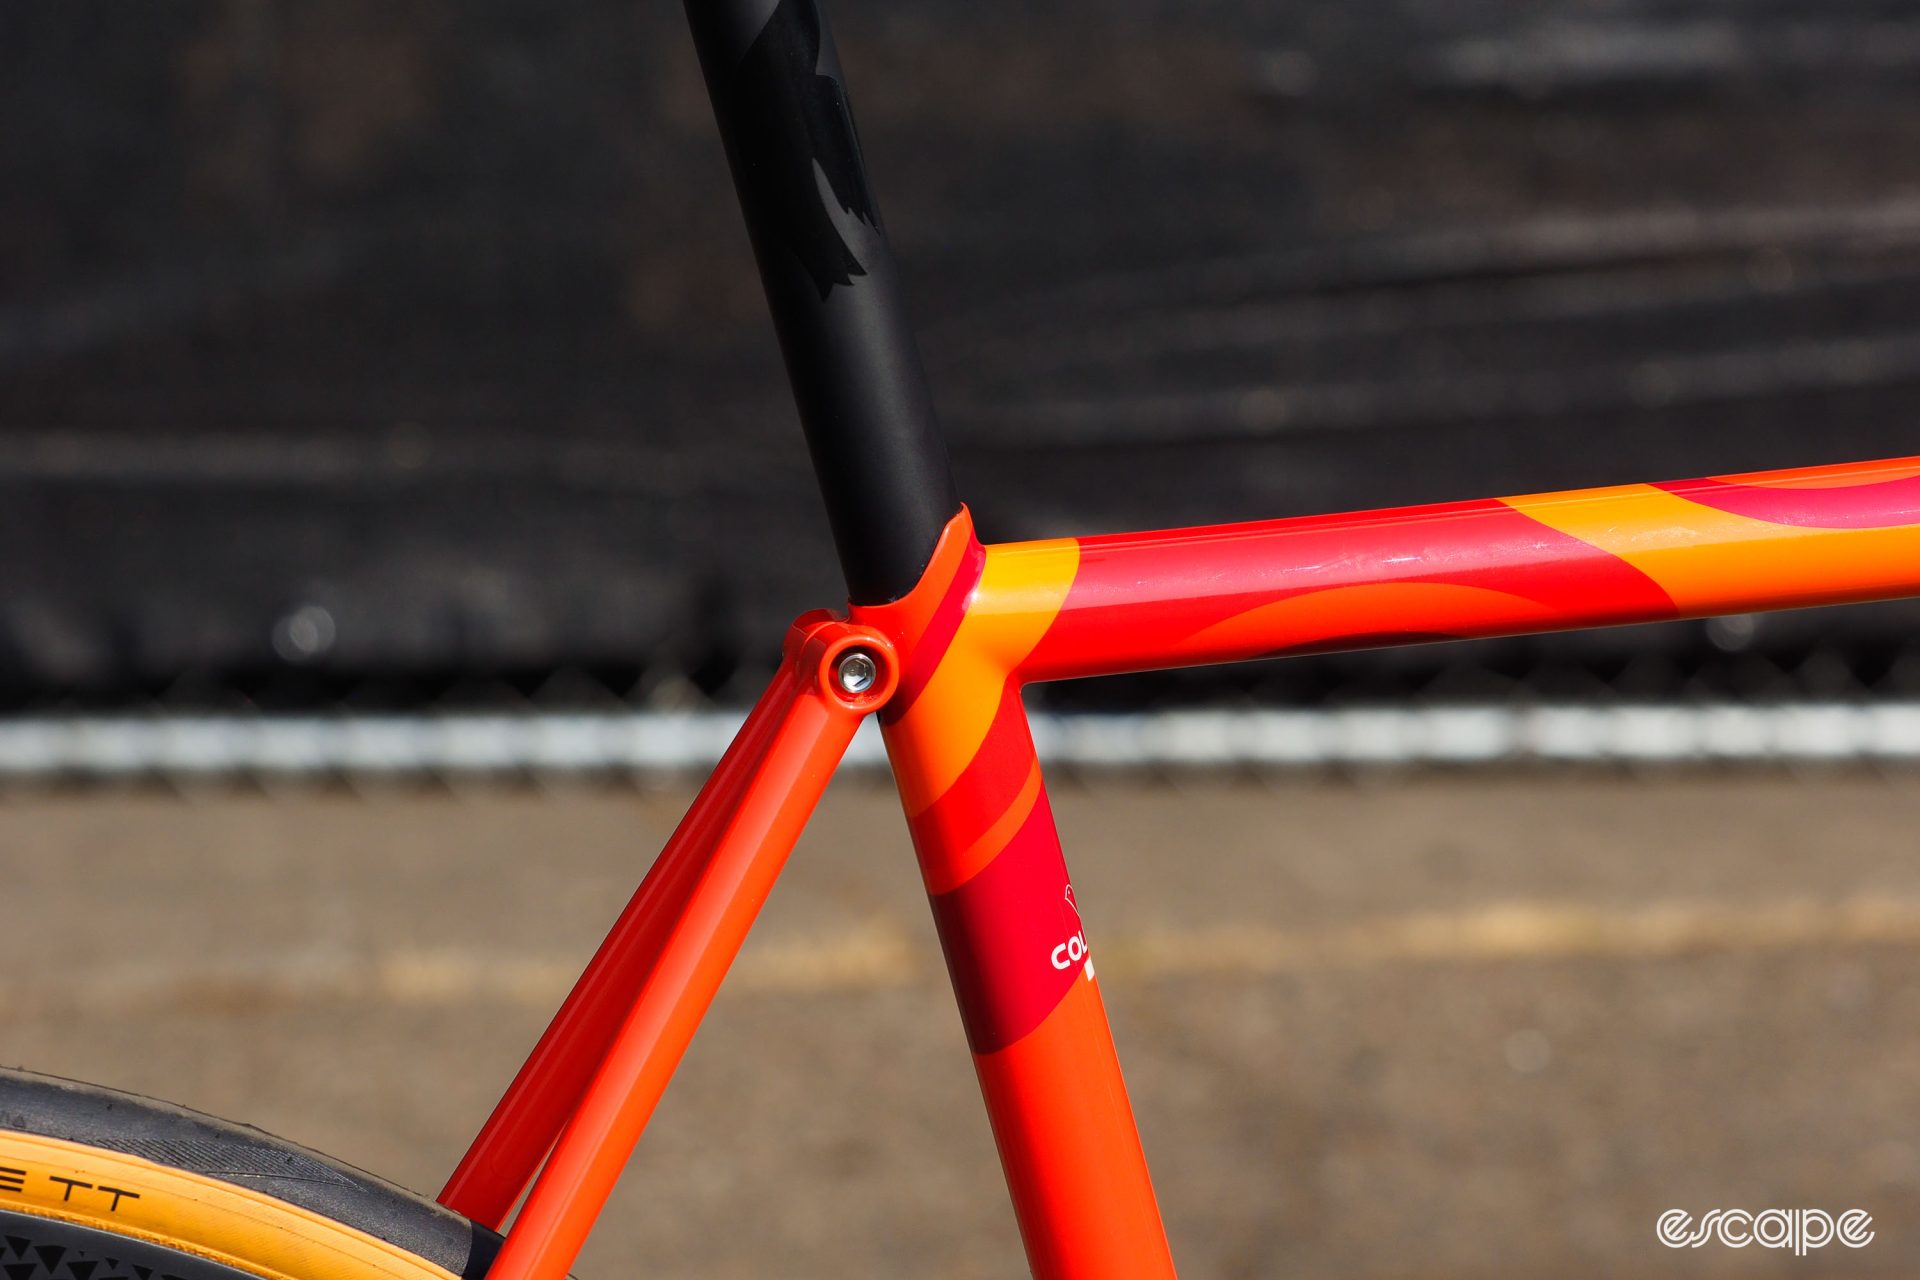 Detail shot of binder bolt on seat cluster, cleanly integrated into the top tube.